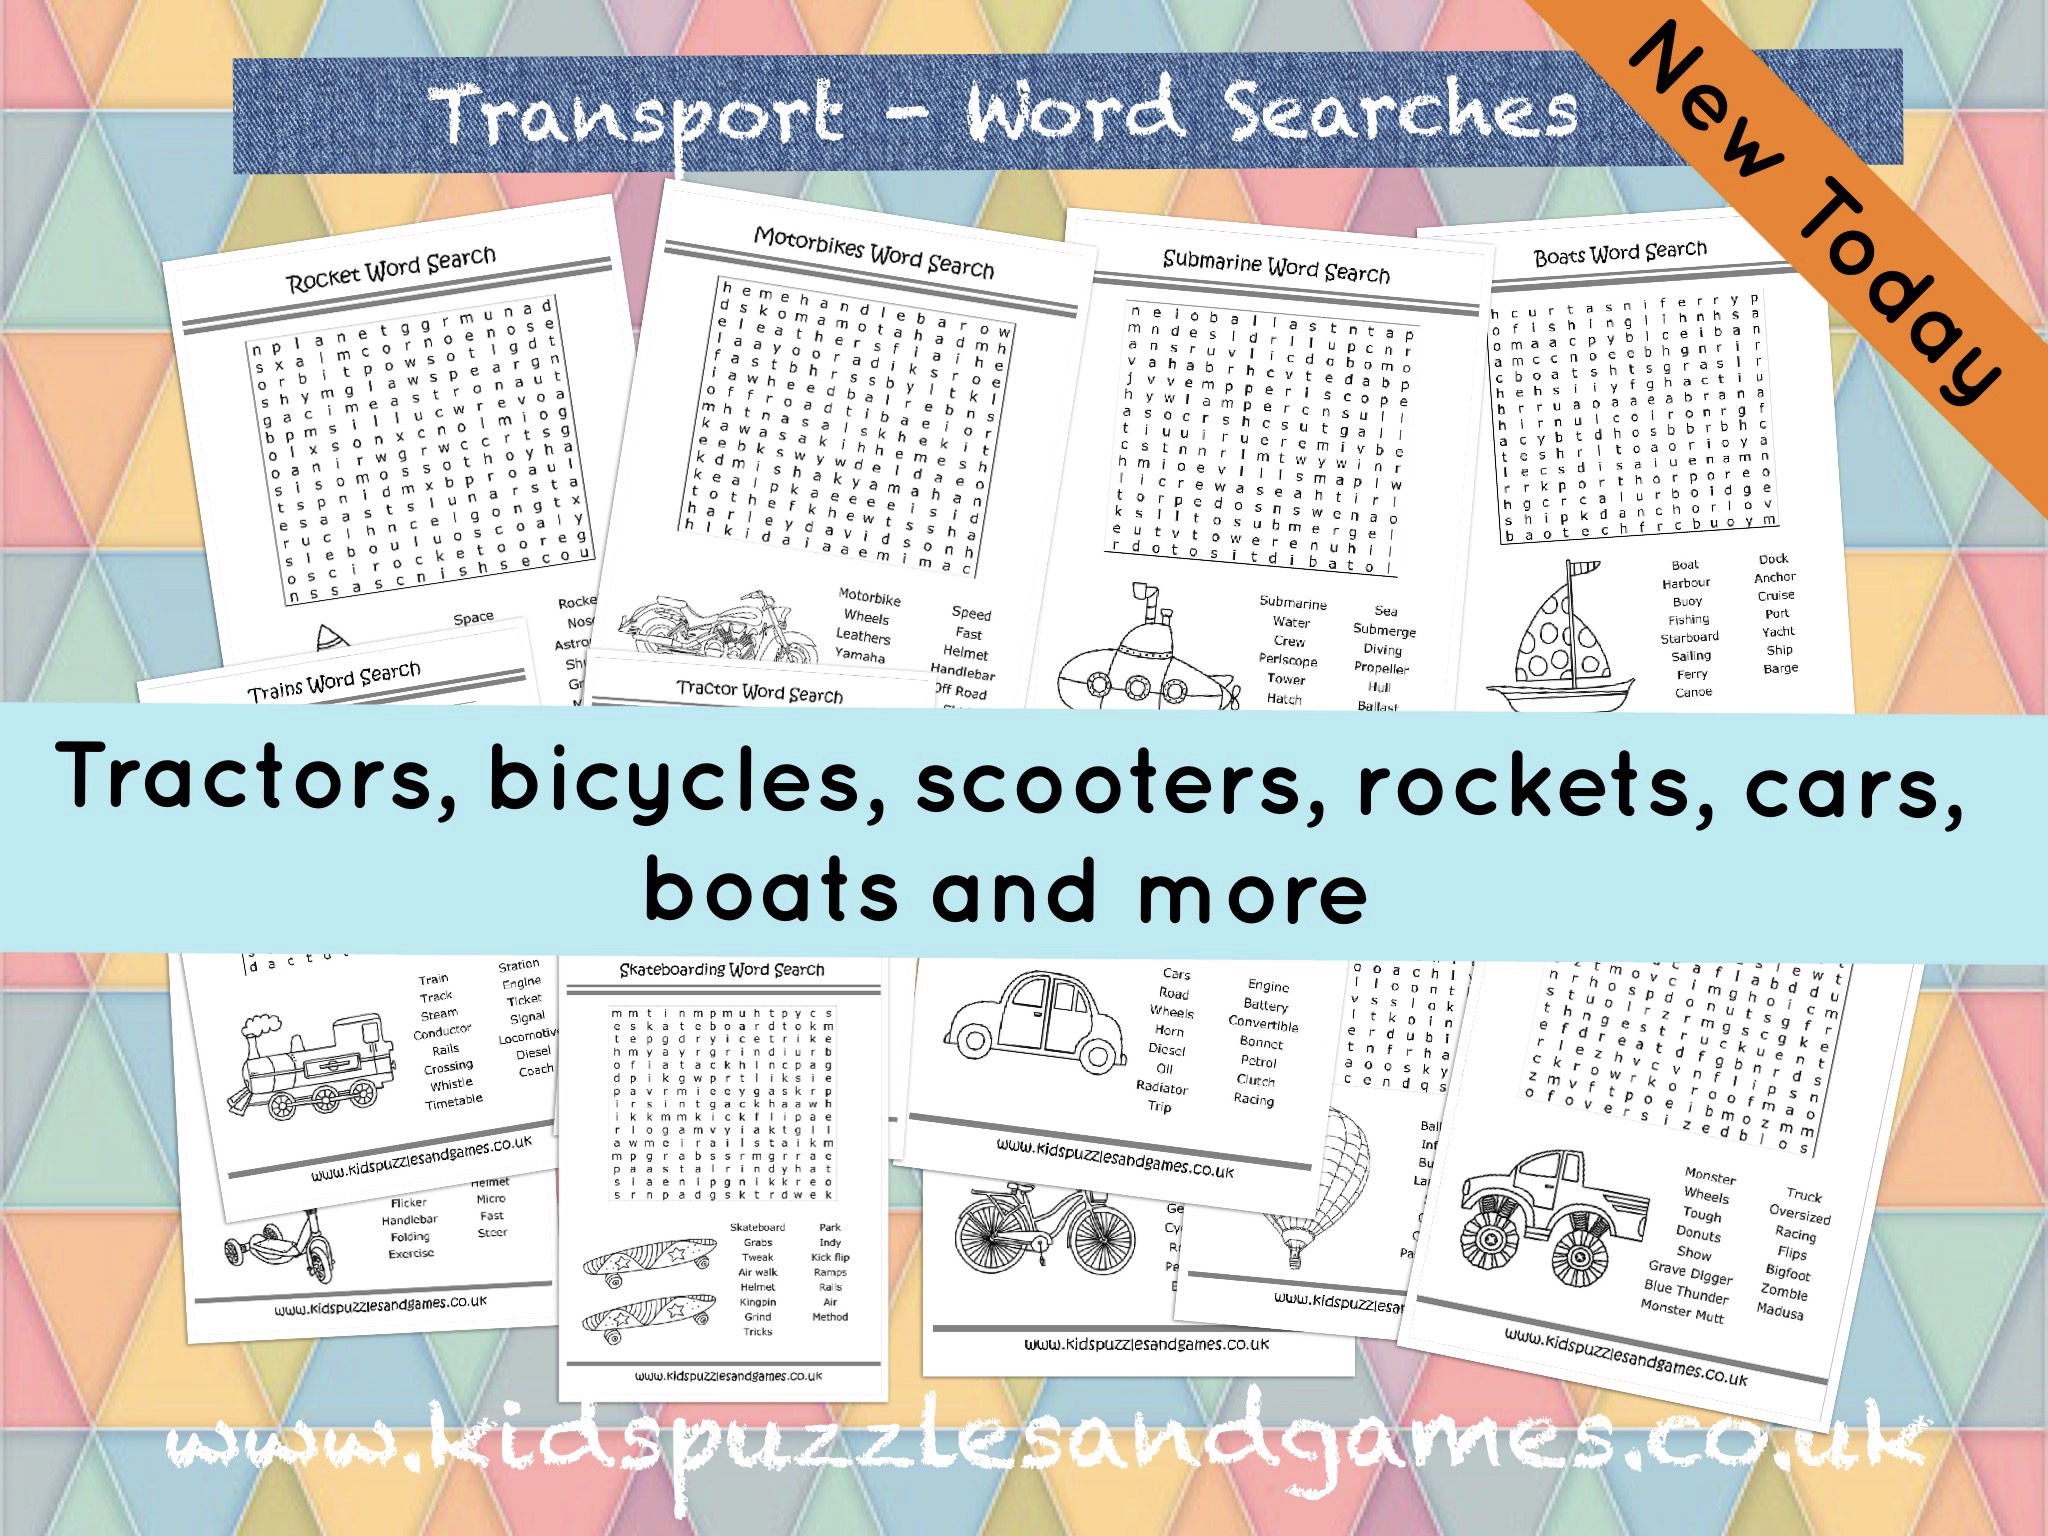 Transport Word Searches added today